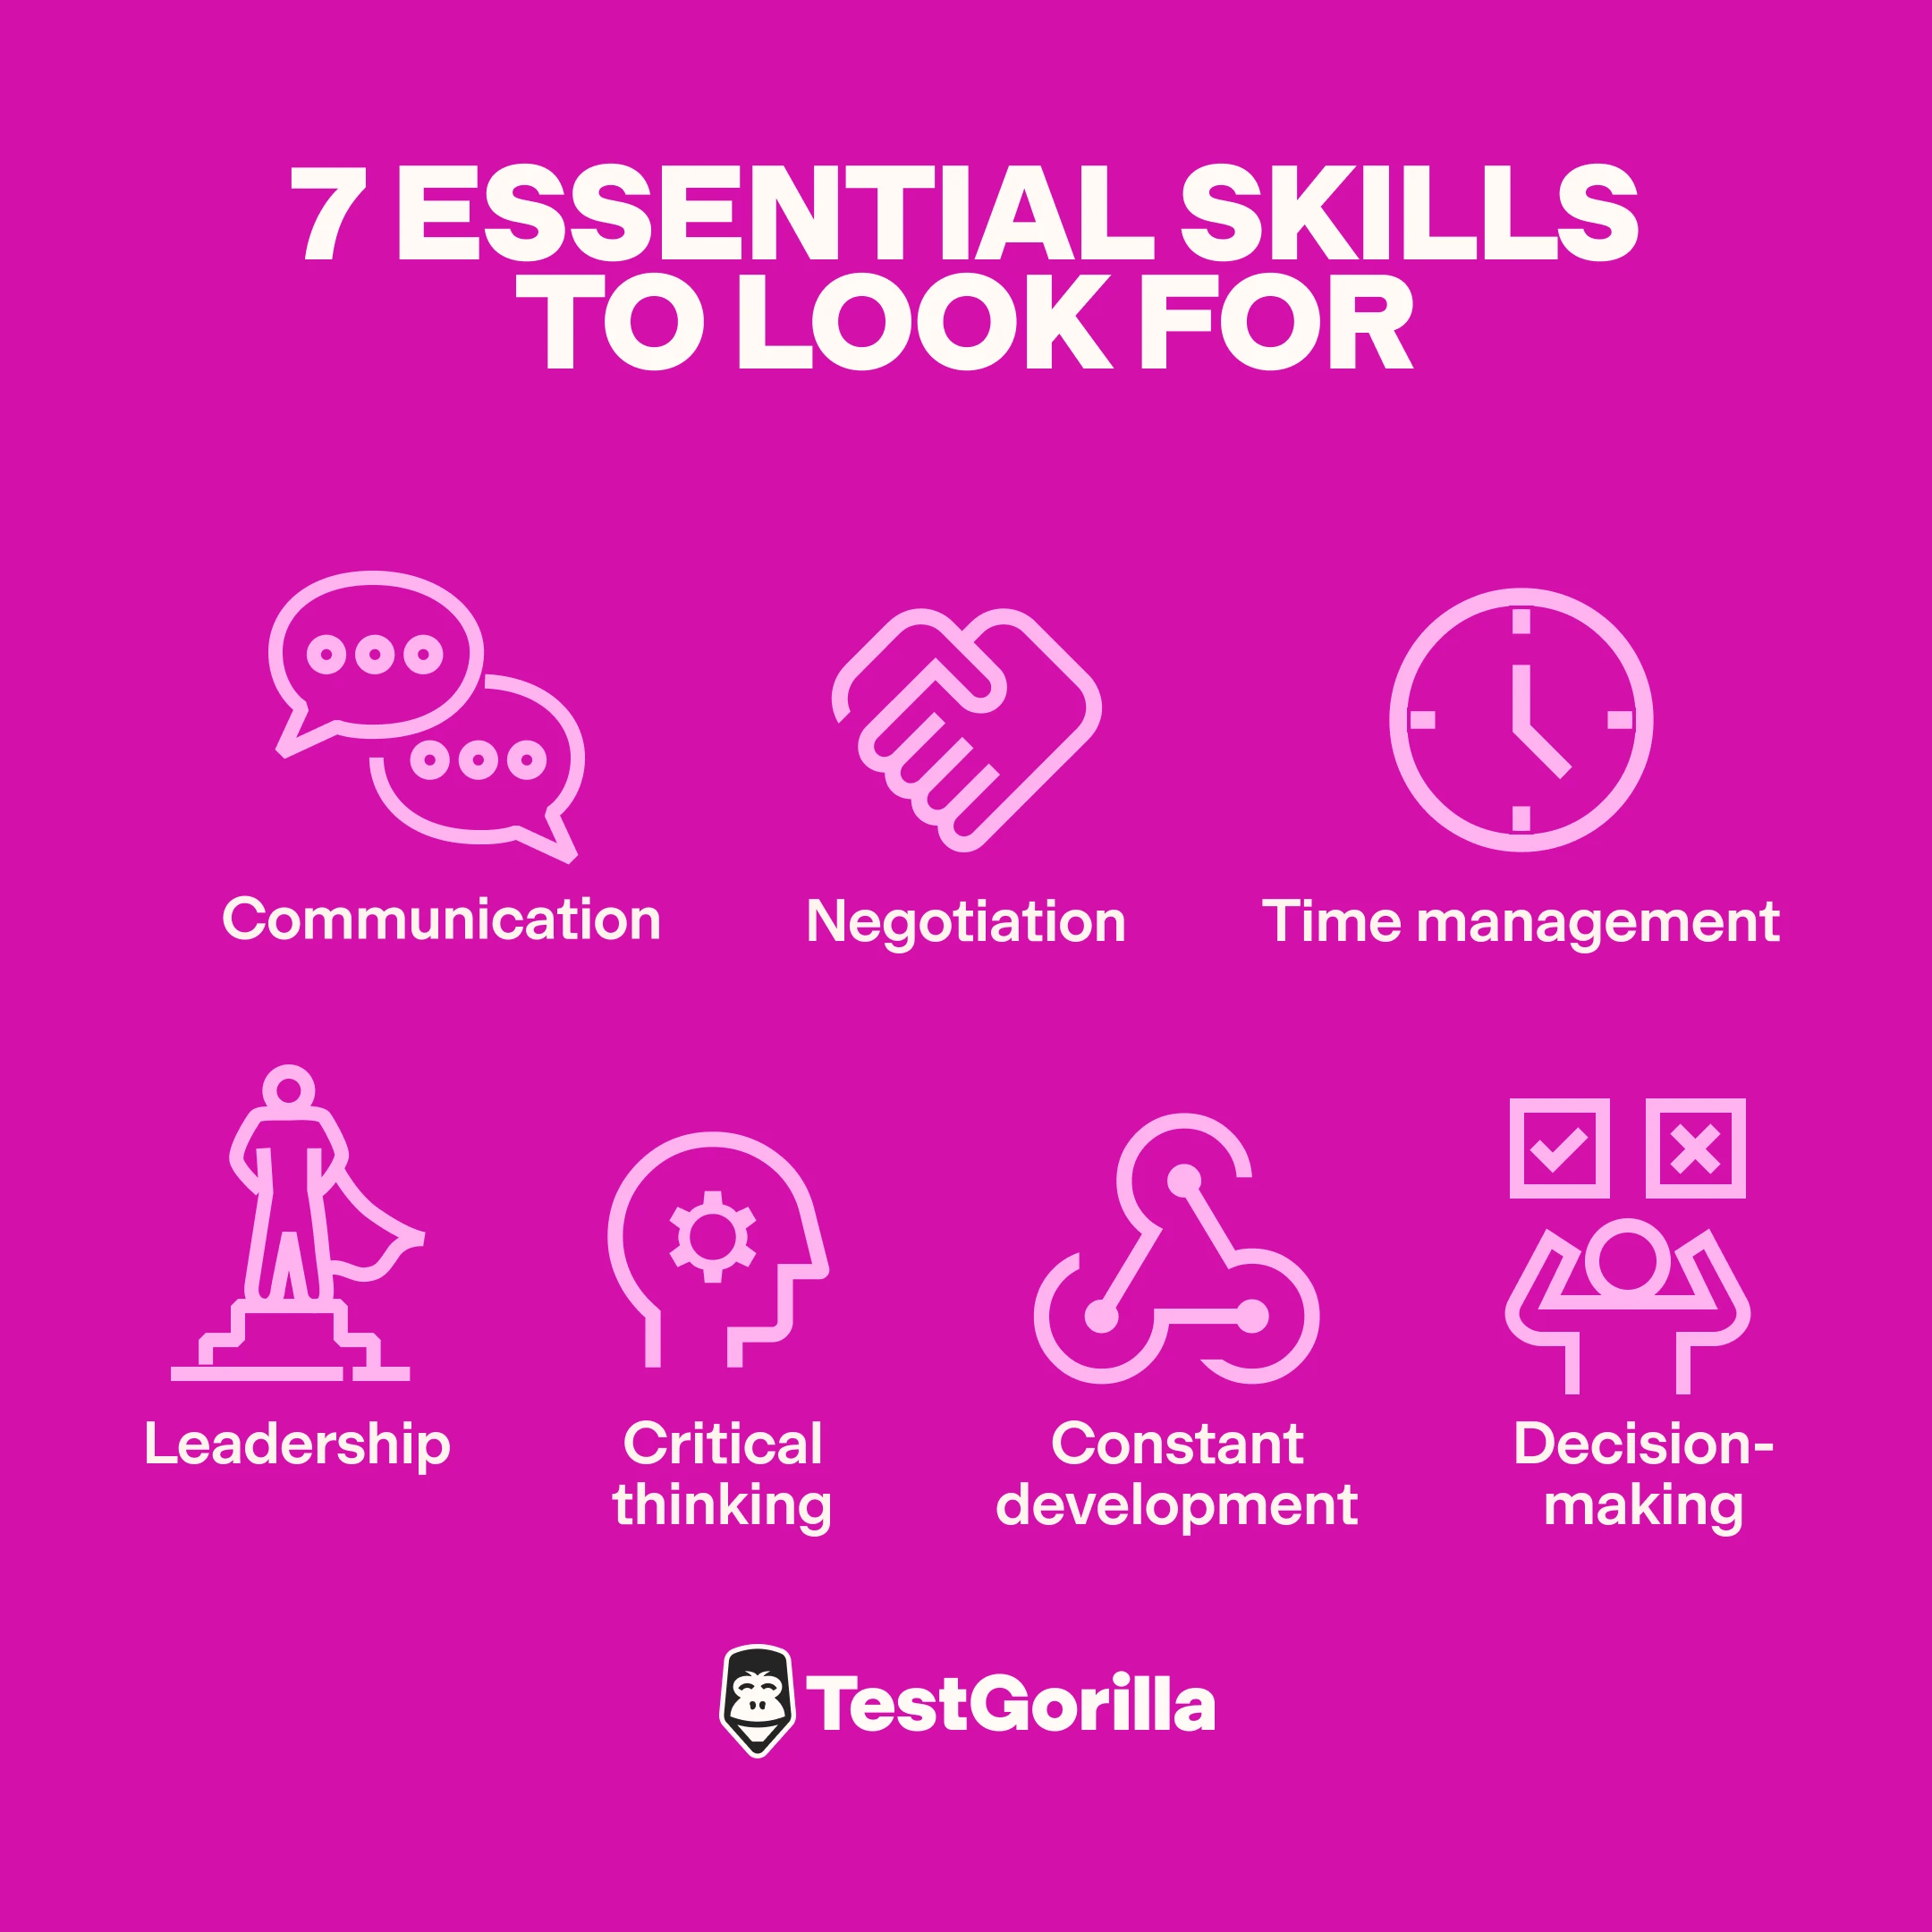 7 essential skills to look for